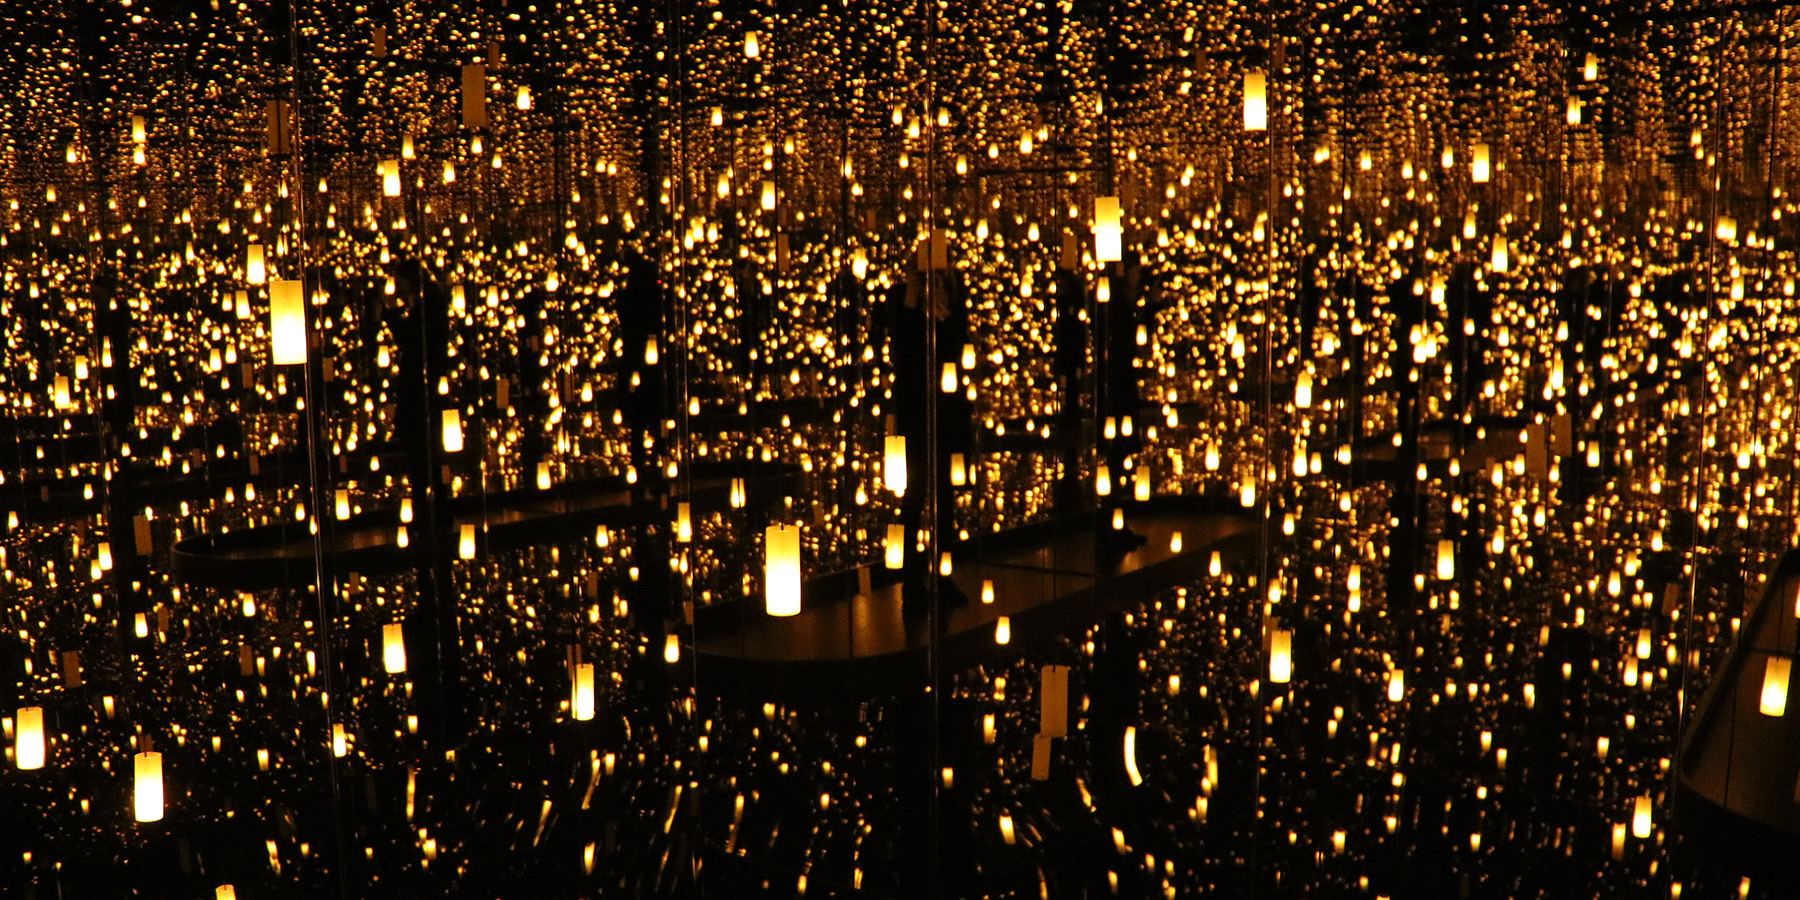 Yayoi Kusama's long-anticipated 'One with Eternity' Hirshhorn exhibit opens  in April : NPR